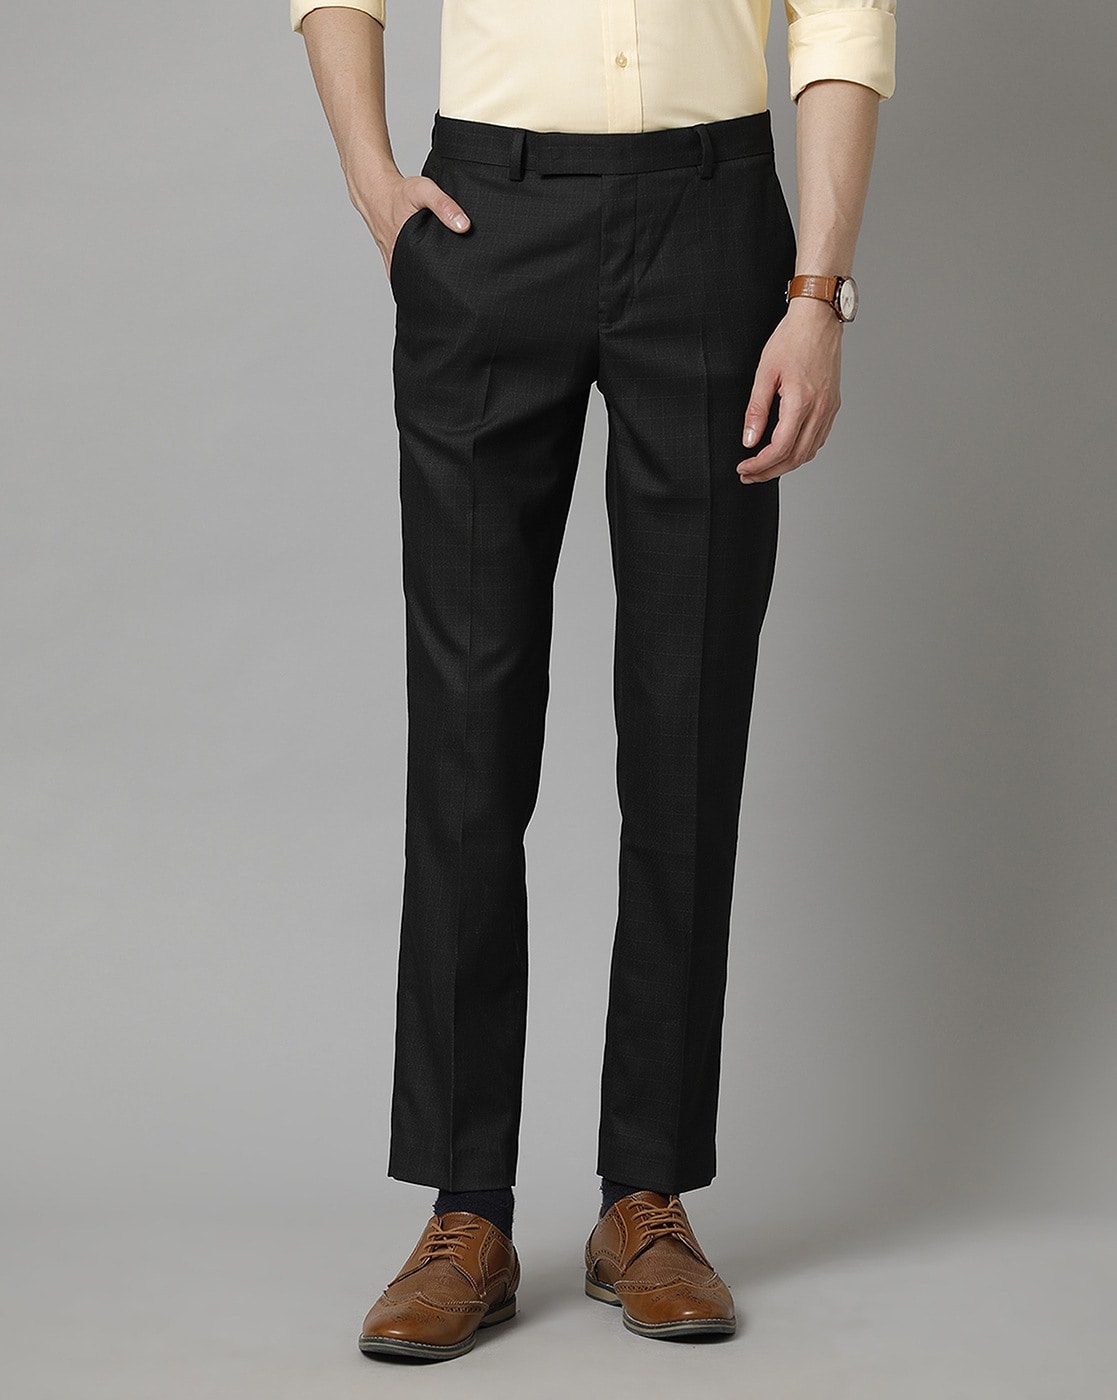 Men's Skinny Fit Big & Tall Suits & Seperates | Nordstrom